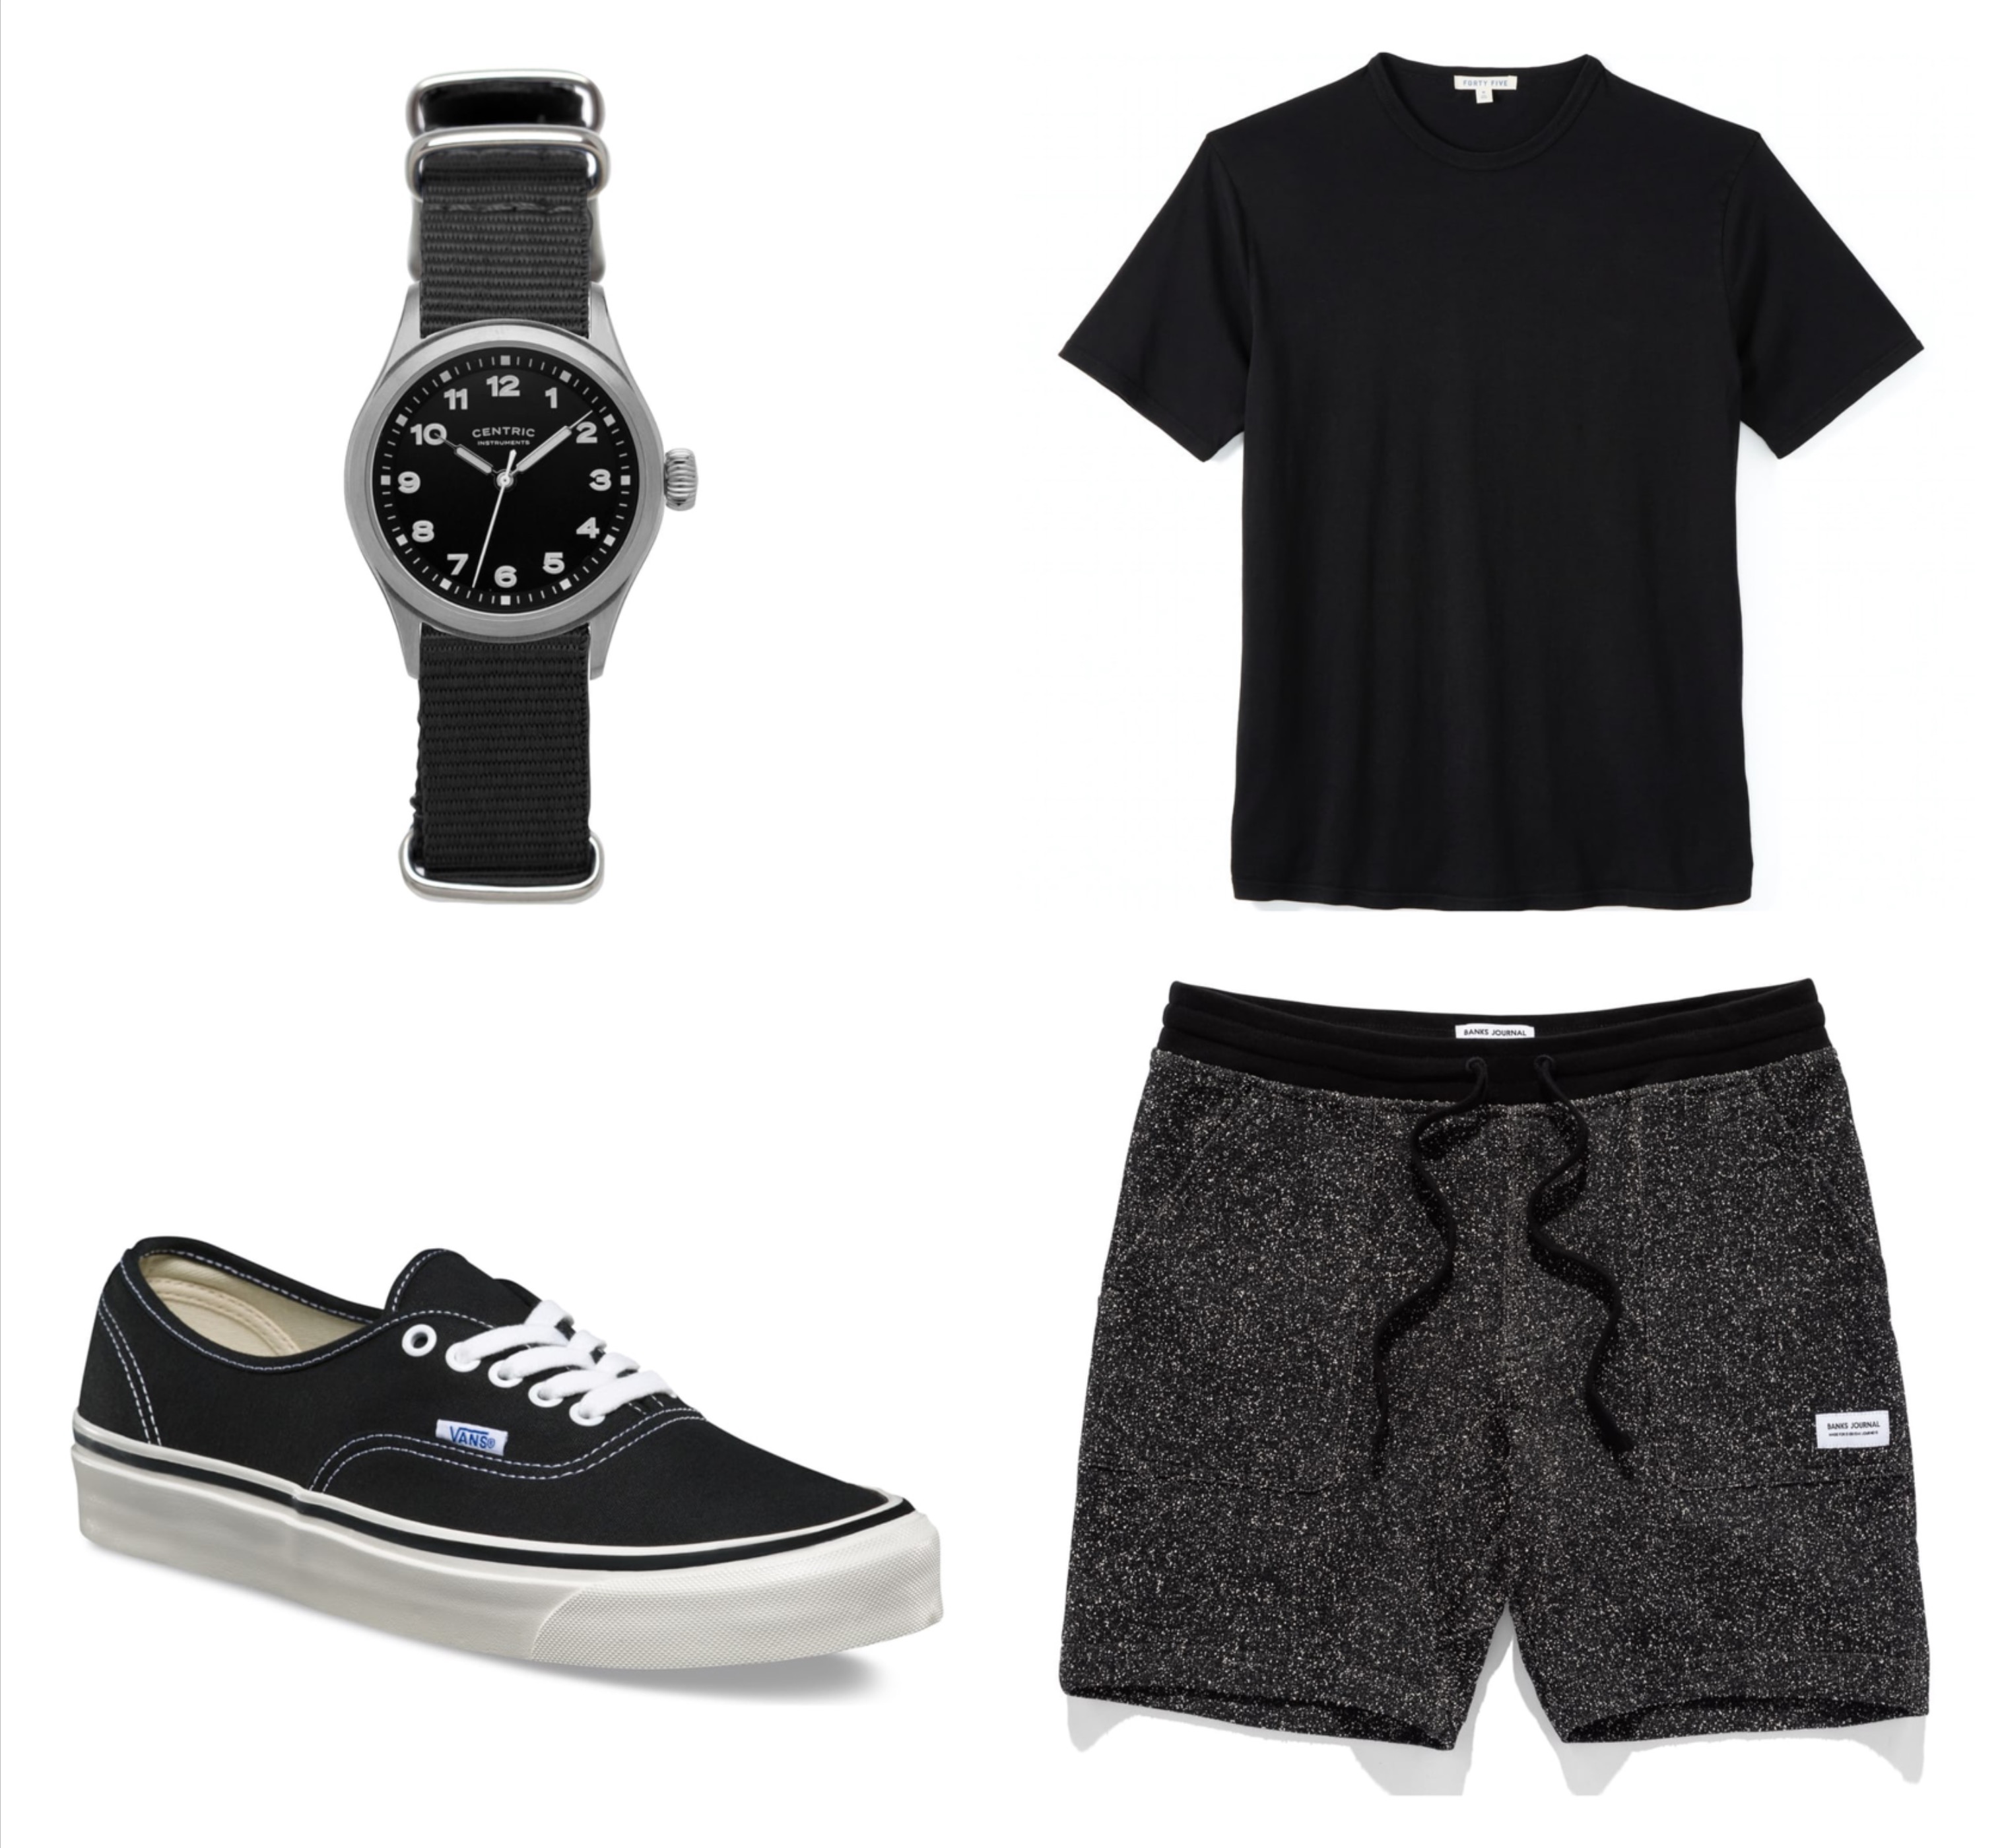 Stylish Blacked Out Daily Gear For Guys - BroBible